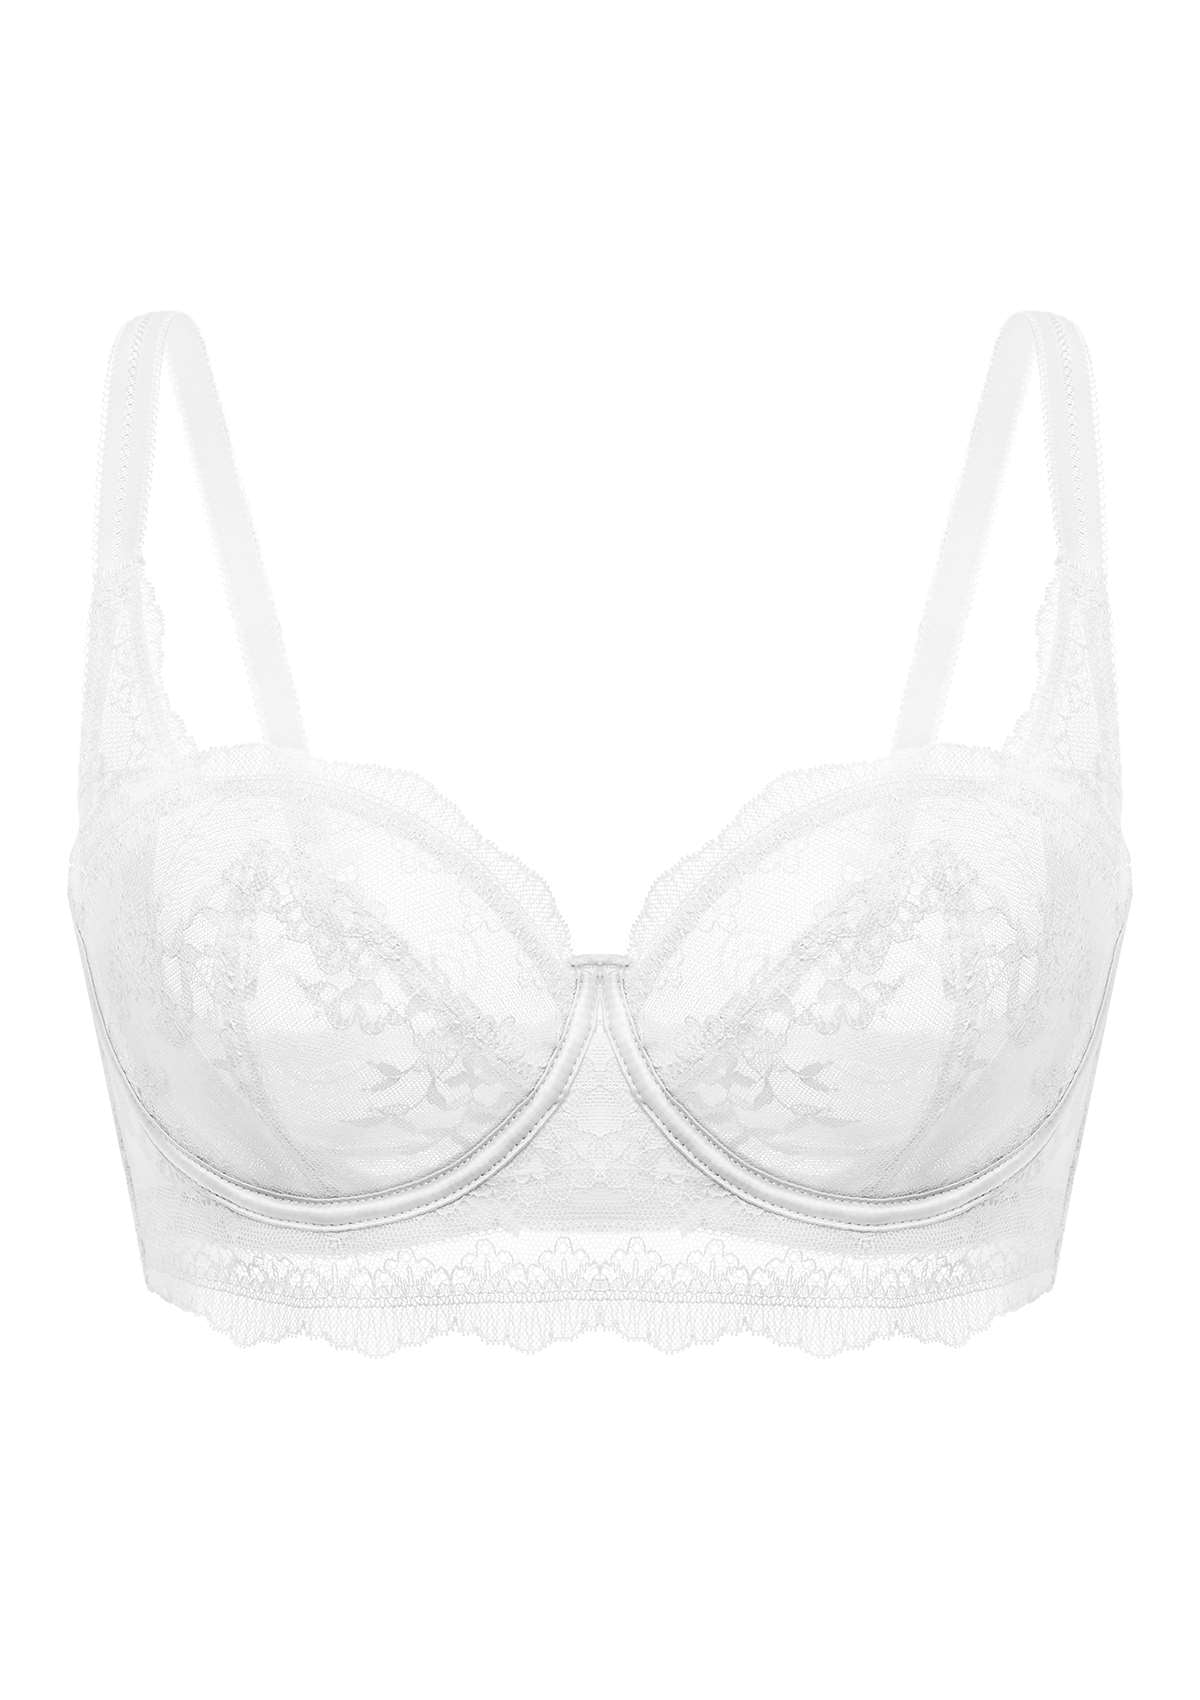 HSIA I Do Floral Lace Bridal Balconette Beautiful Bra For Special Day - White / 40 / DDD/F